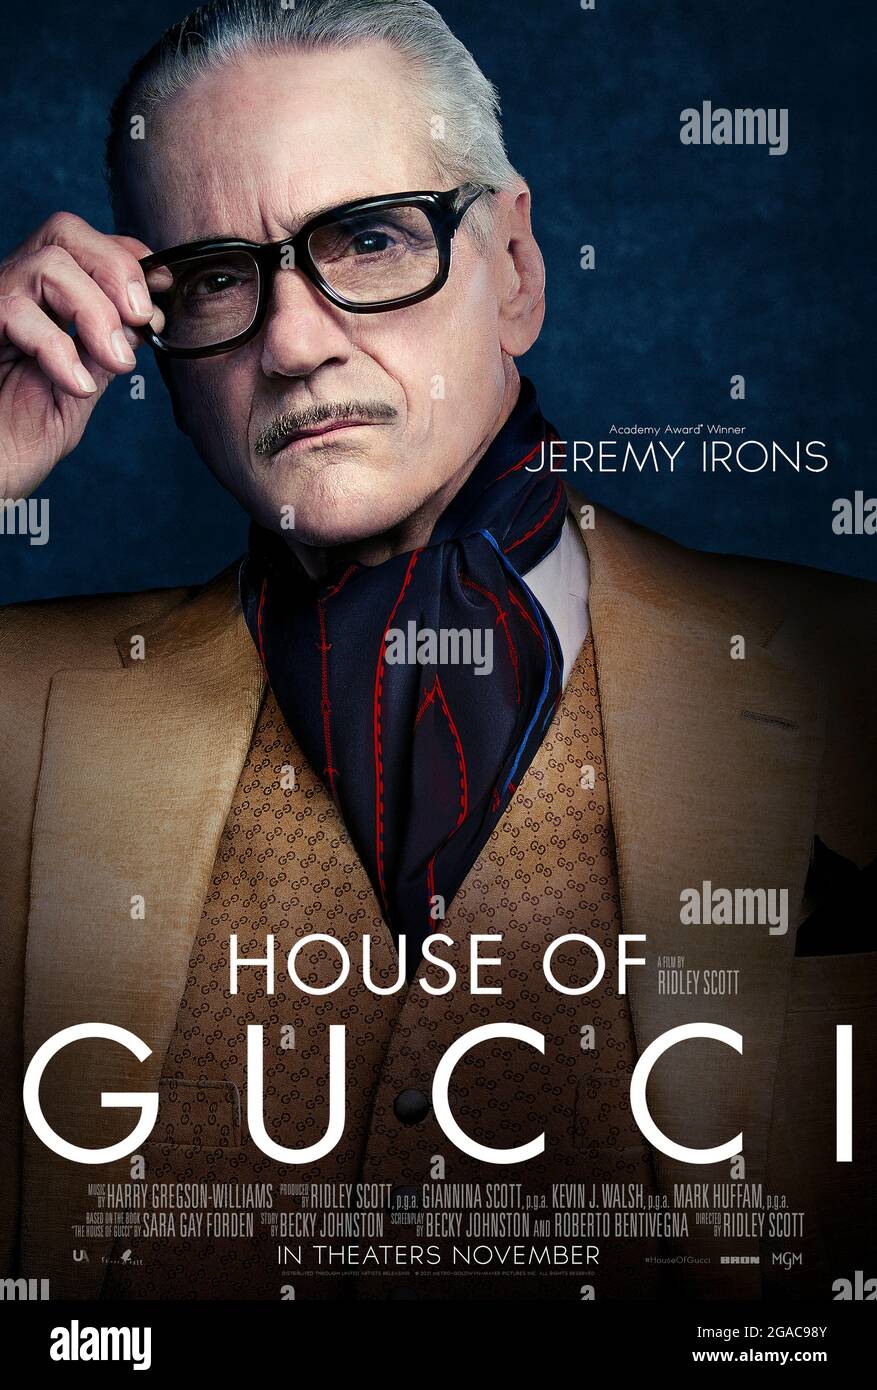 House of Gucci (2021) directed by Ridley Scott and starring Jeremy Irons as Rodolfo Gucci in a crime drama inspired by the family empire behind the famous Italian fashion house. Stock Photo